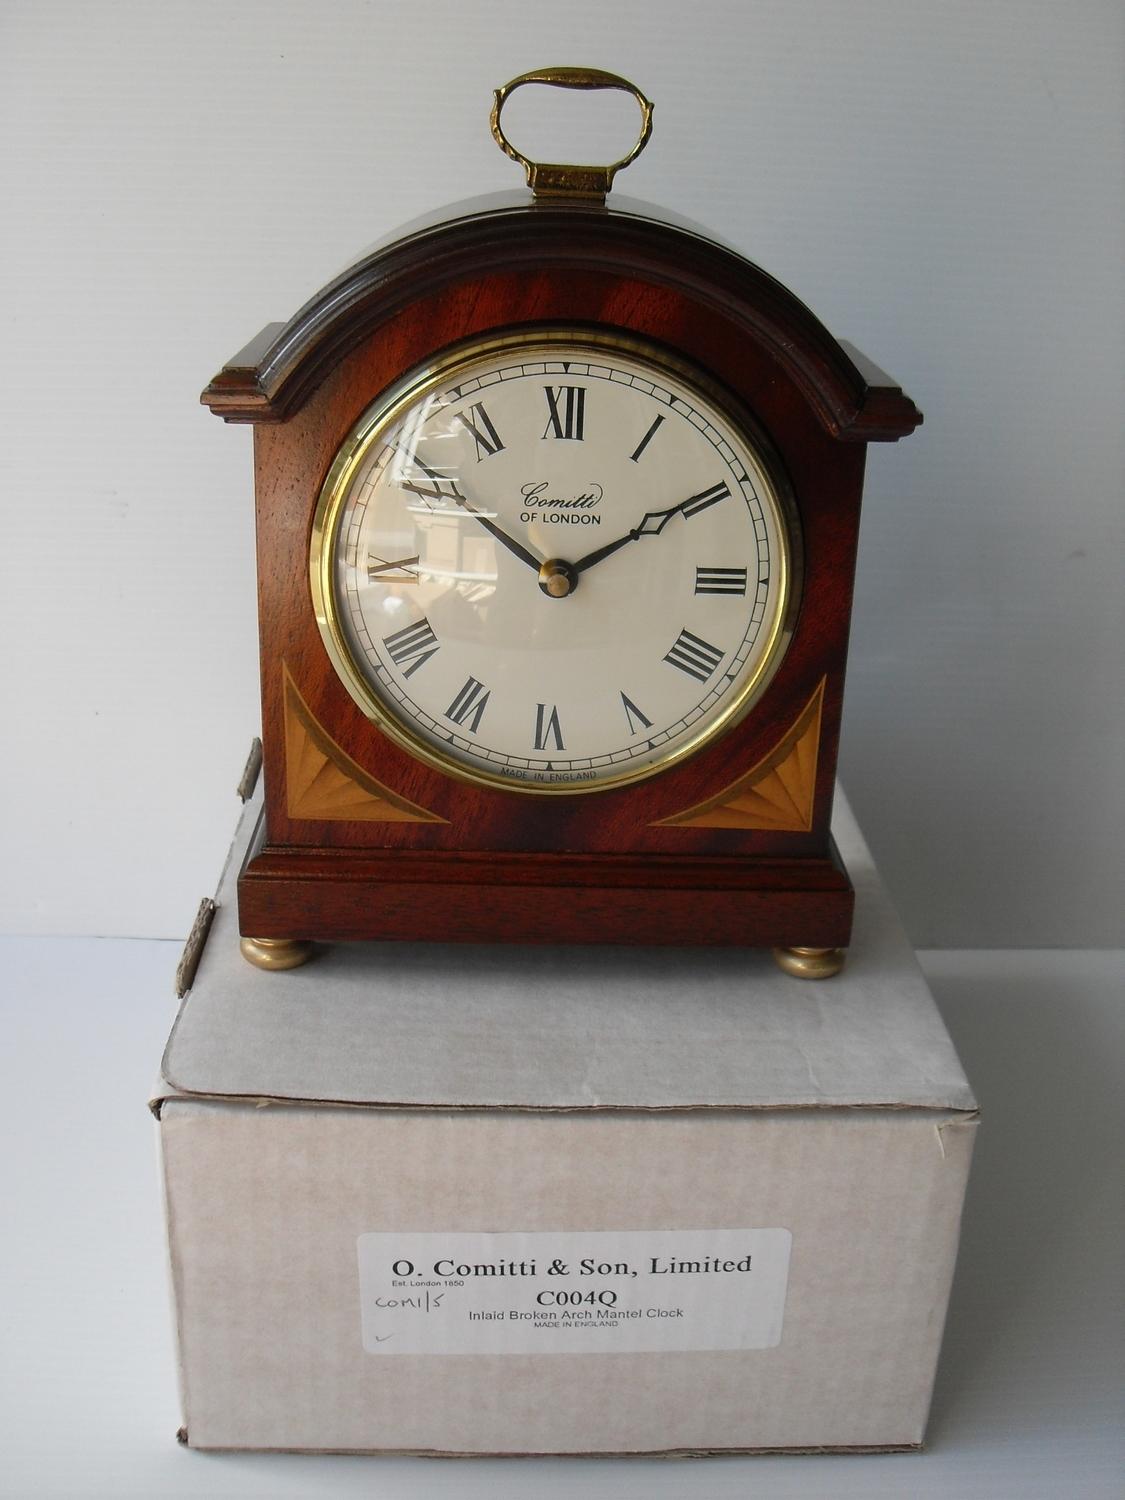 O. Comitti & Son, an Edwardian-style inlaid, broken arch mantle clock, boxed, as new